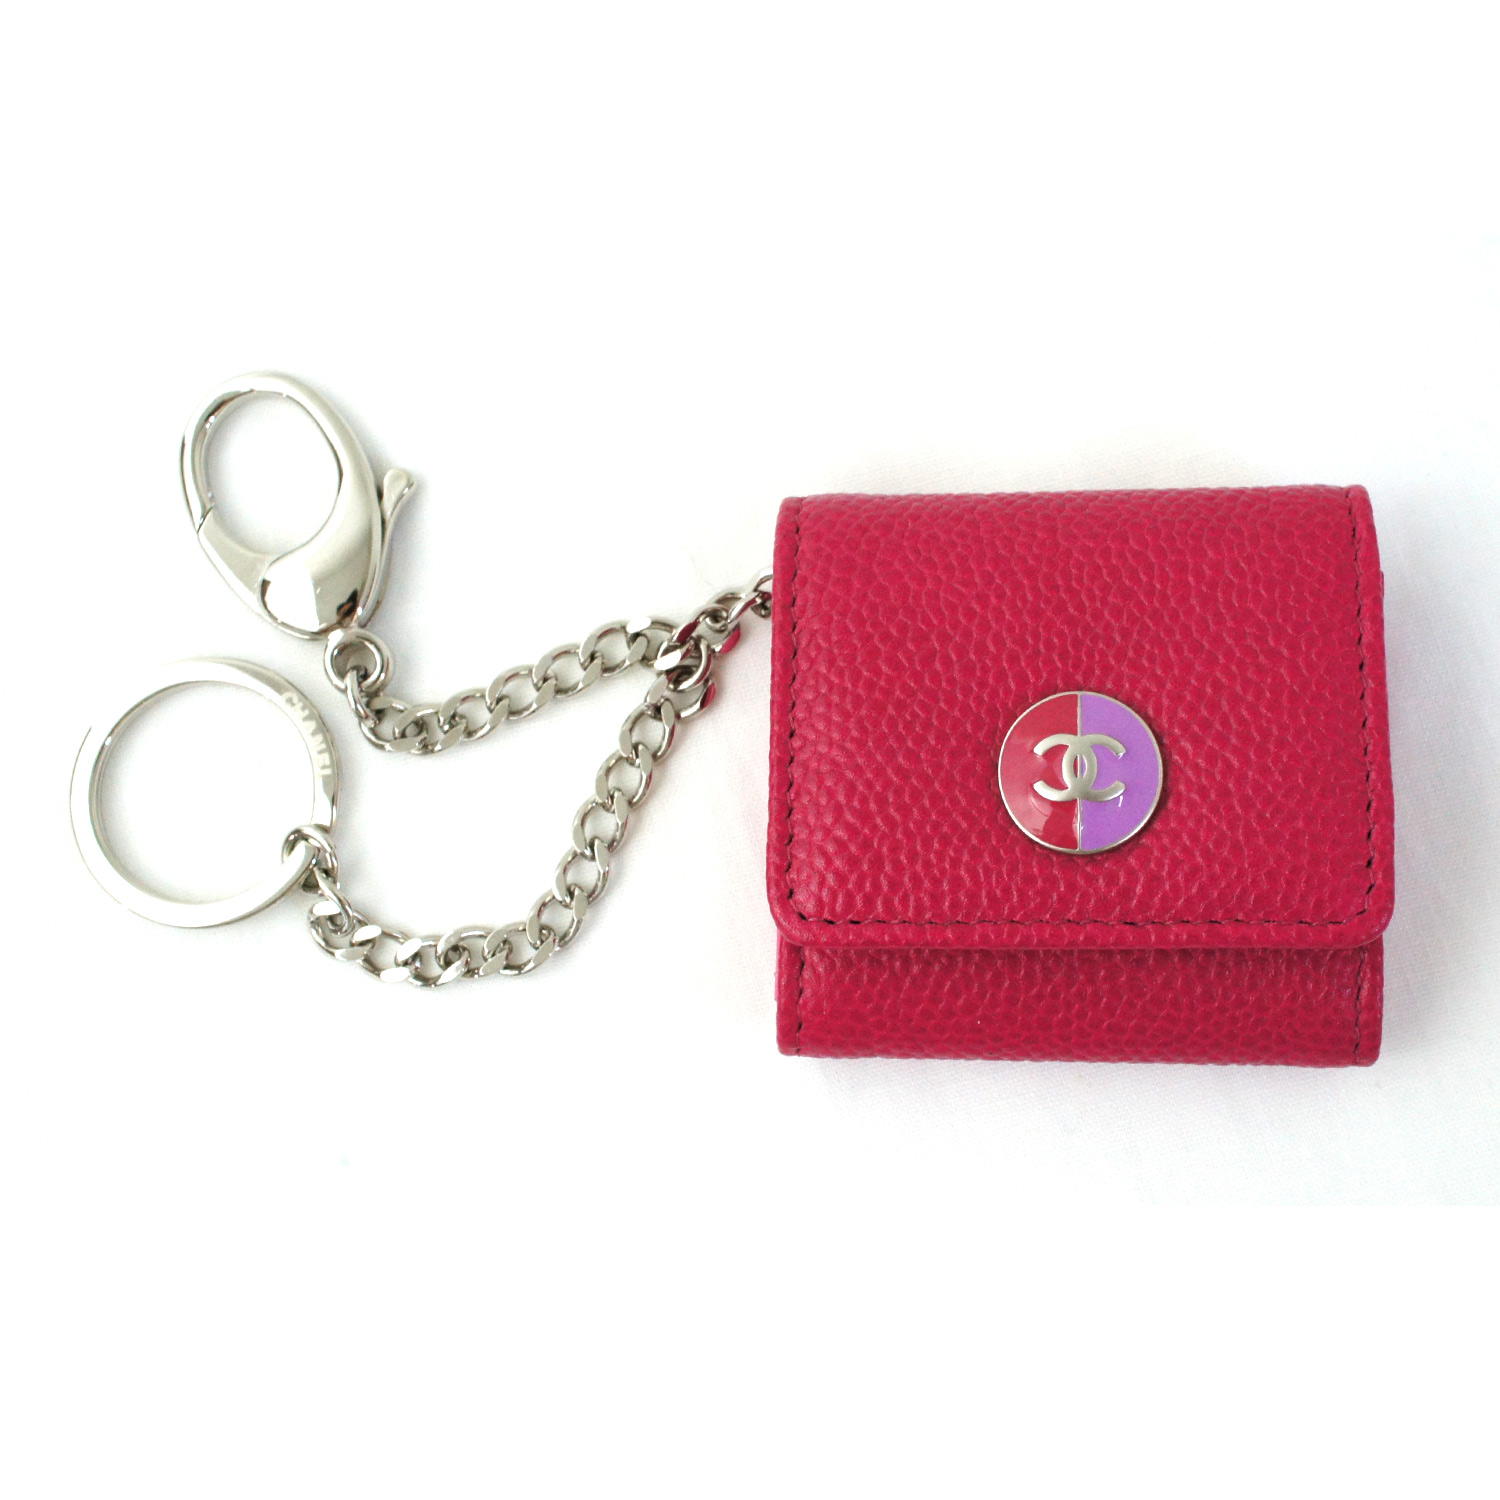 Women's :: Wallets and Coin Cases :: Key Cases :: CHANEL Keyholder Pink Two  Tone Color CC ( Key Ring, Key Clip )